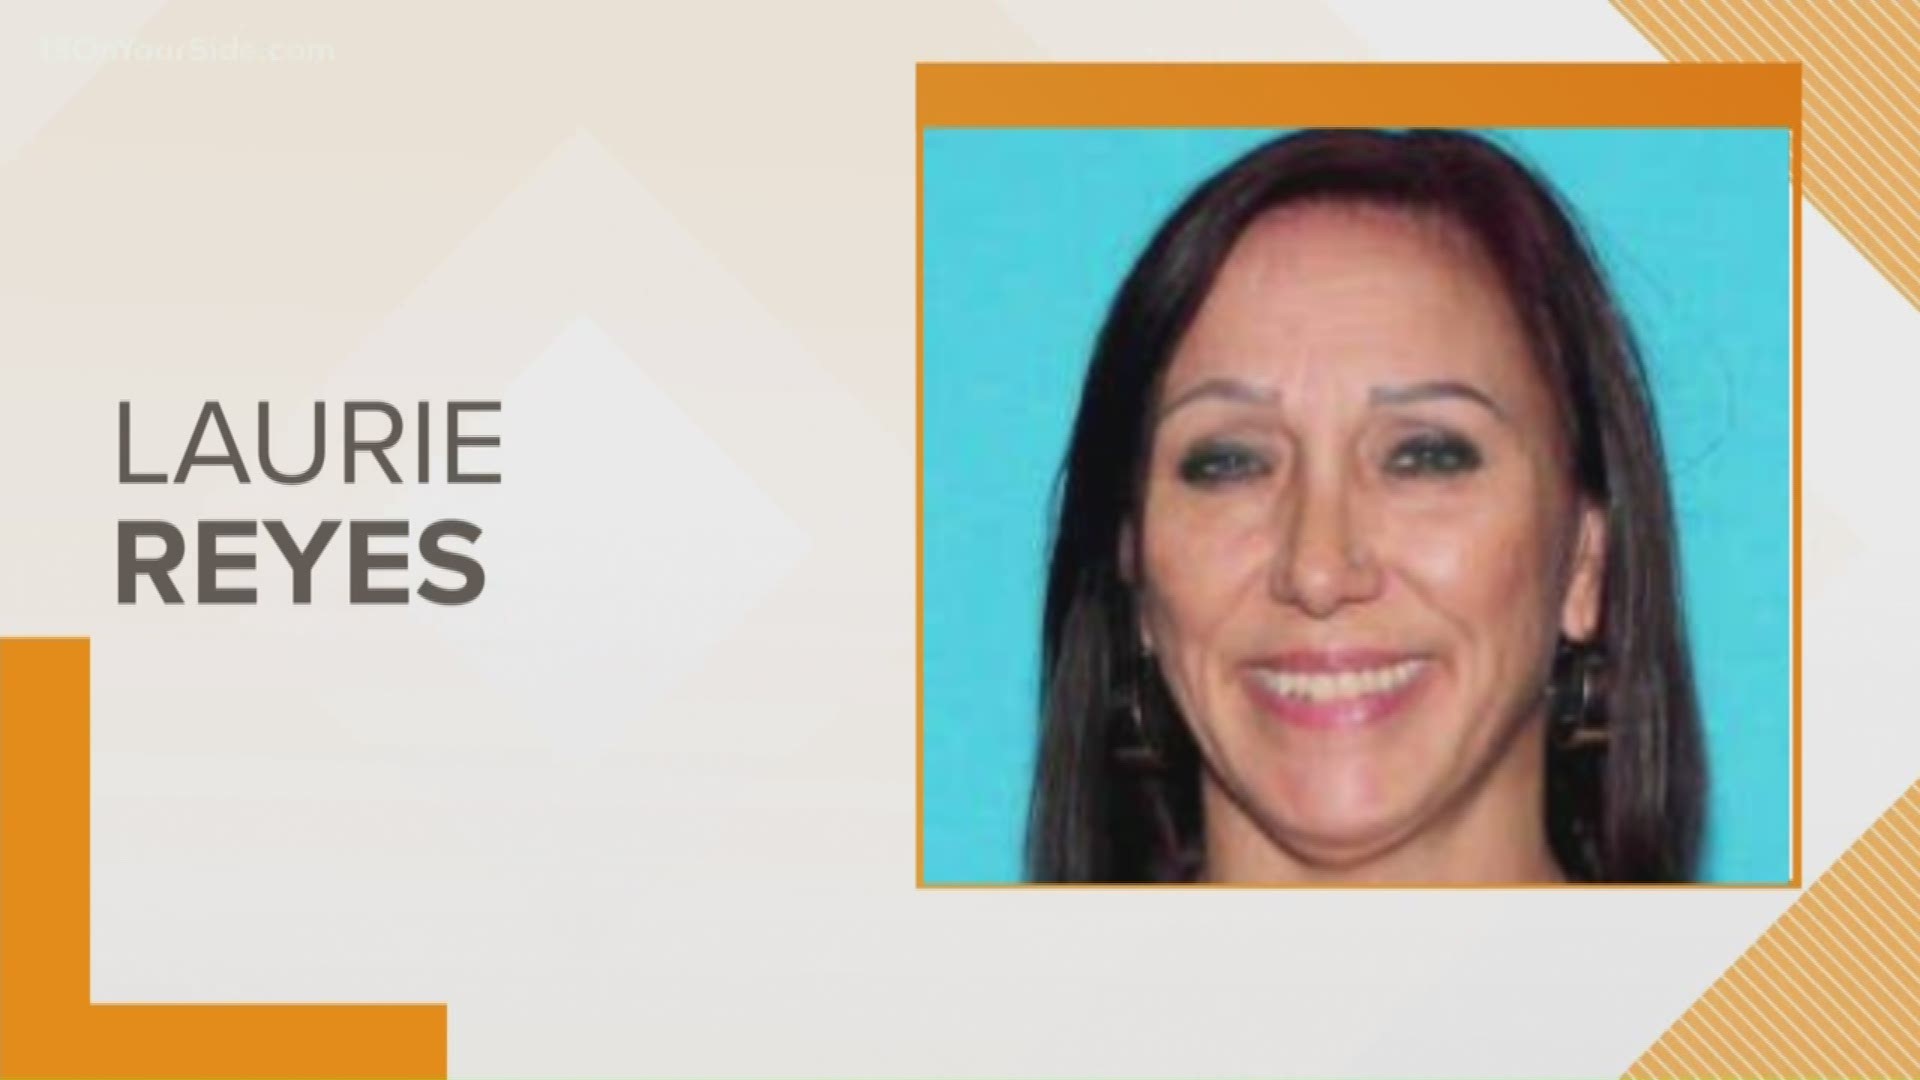 Police are asking for the public's assistance in finding 47-year-old woman who may be injured.